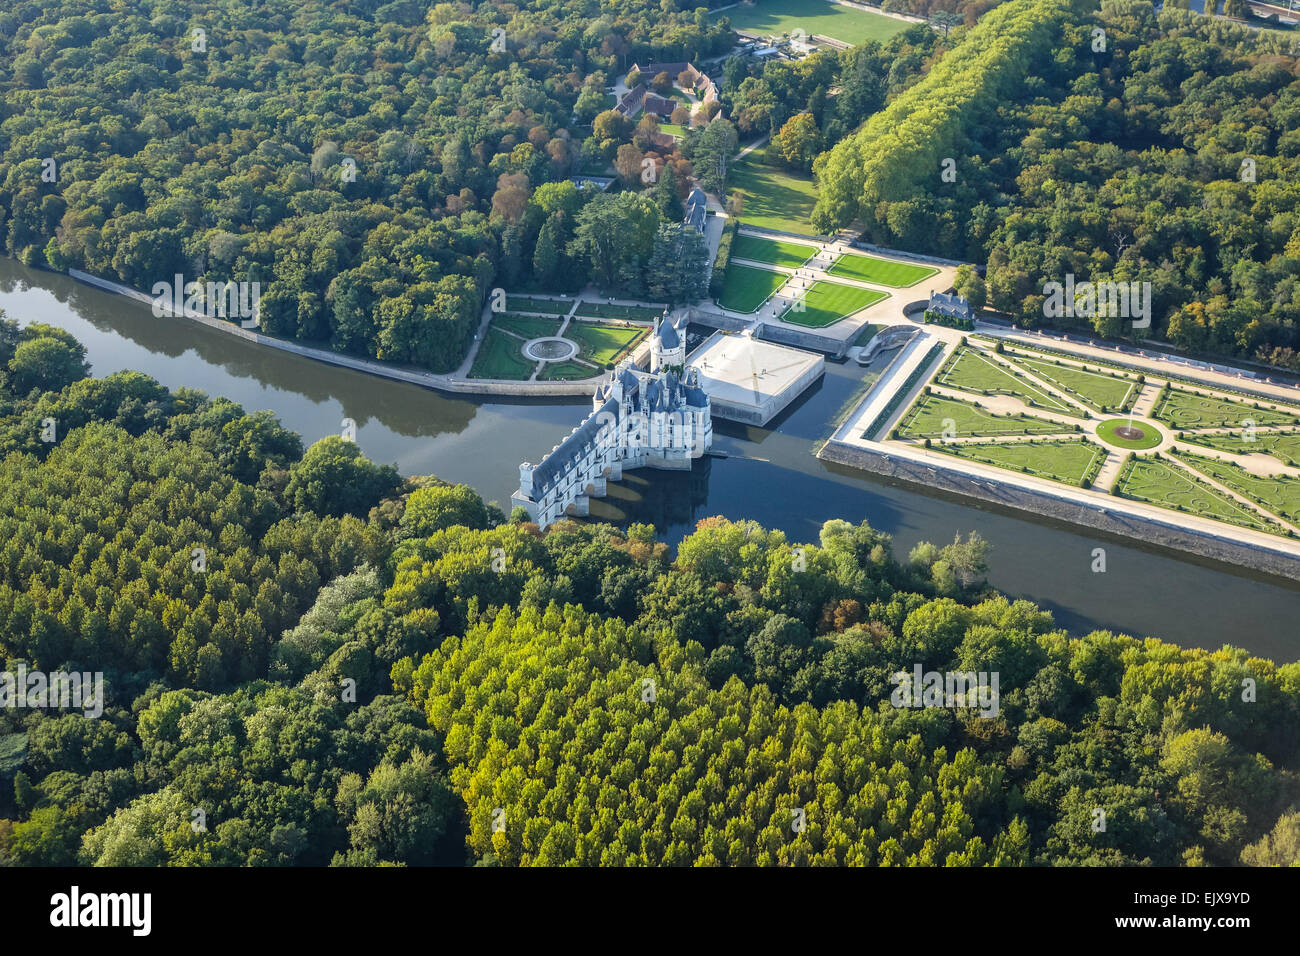 Chateau Chenonceau, Loire Valley, France. Aerial view from a ulm aircraft showing the palace and the river cher. Stock Photo